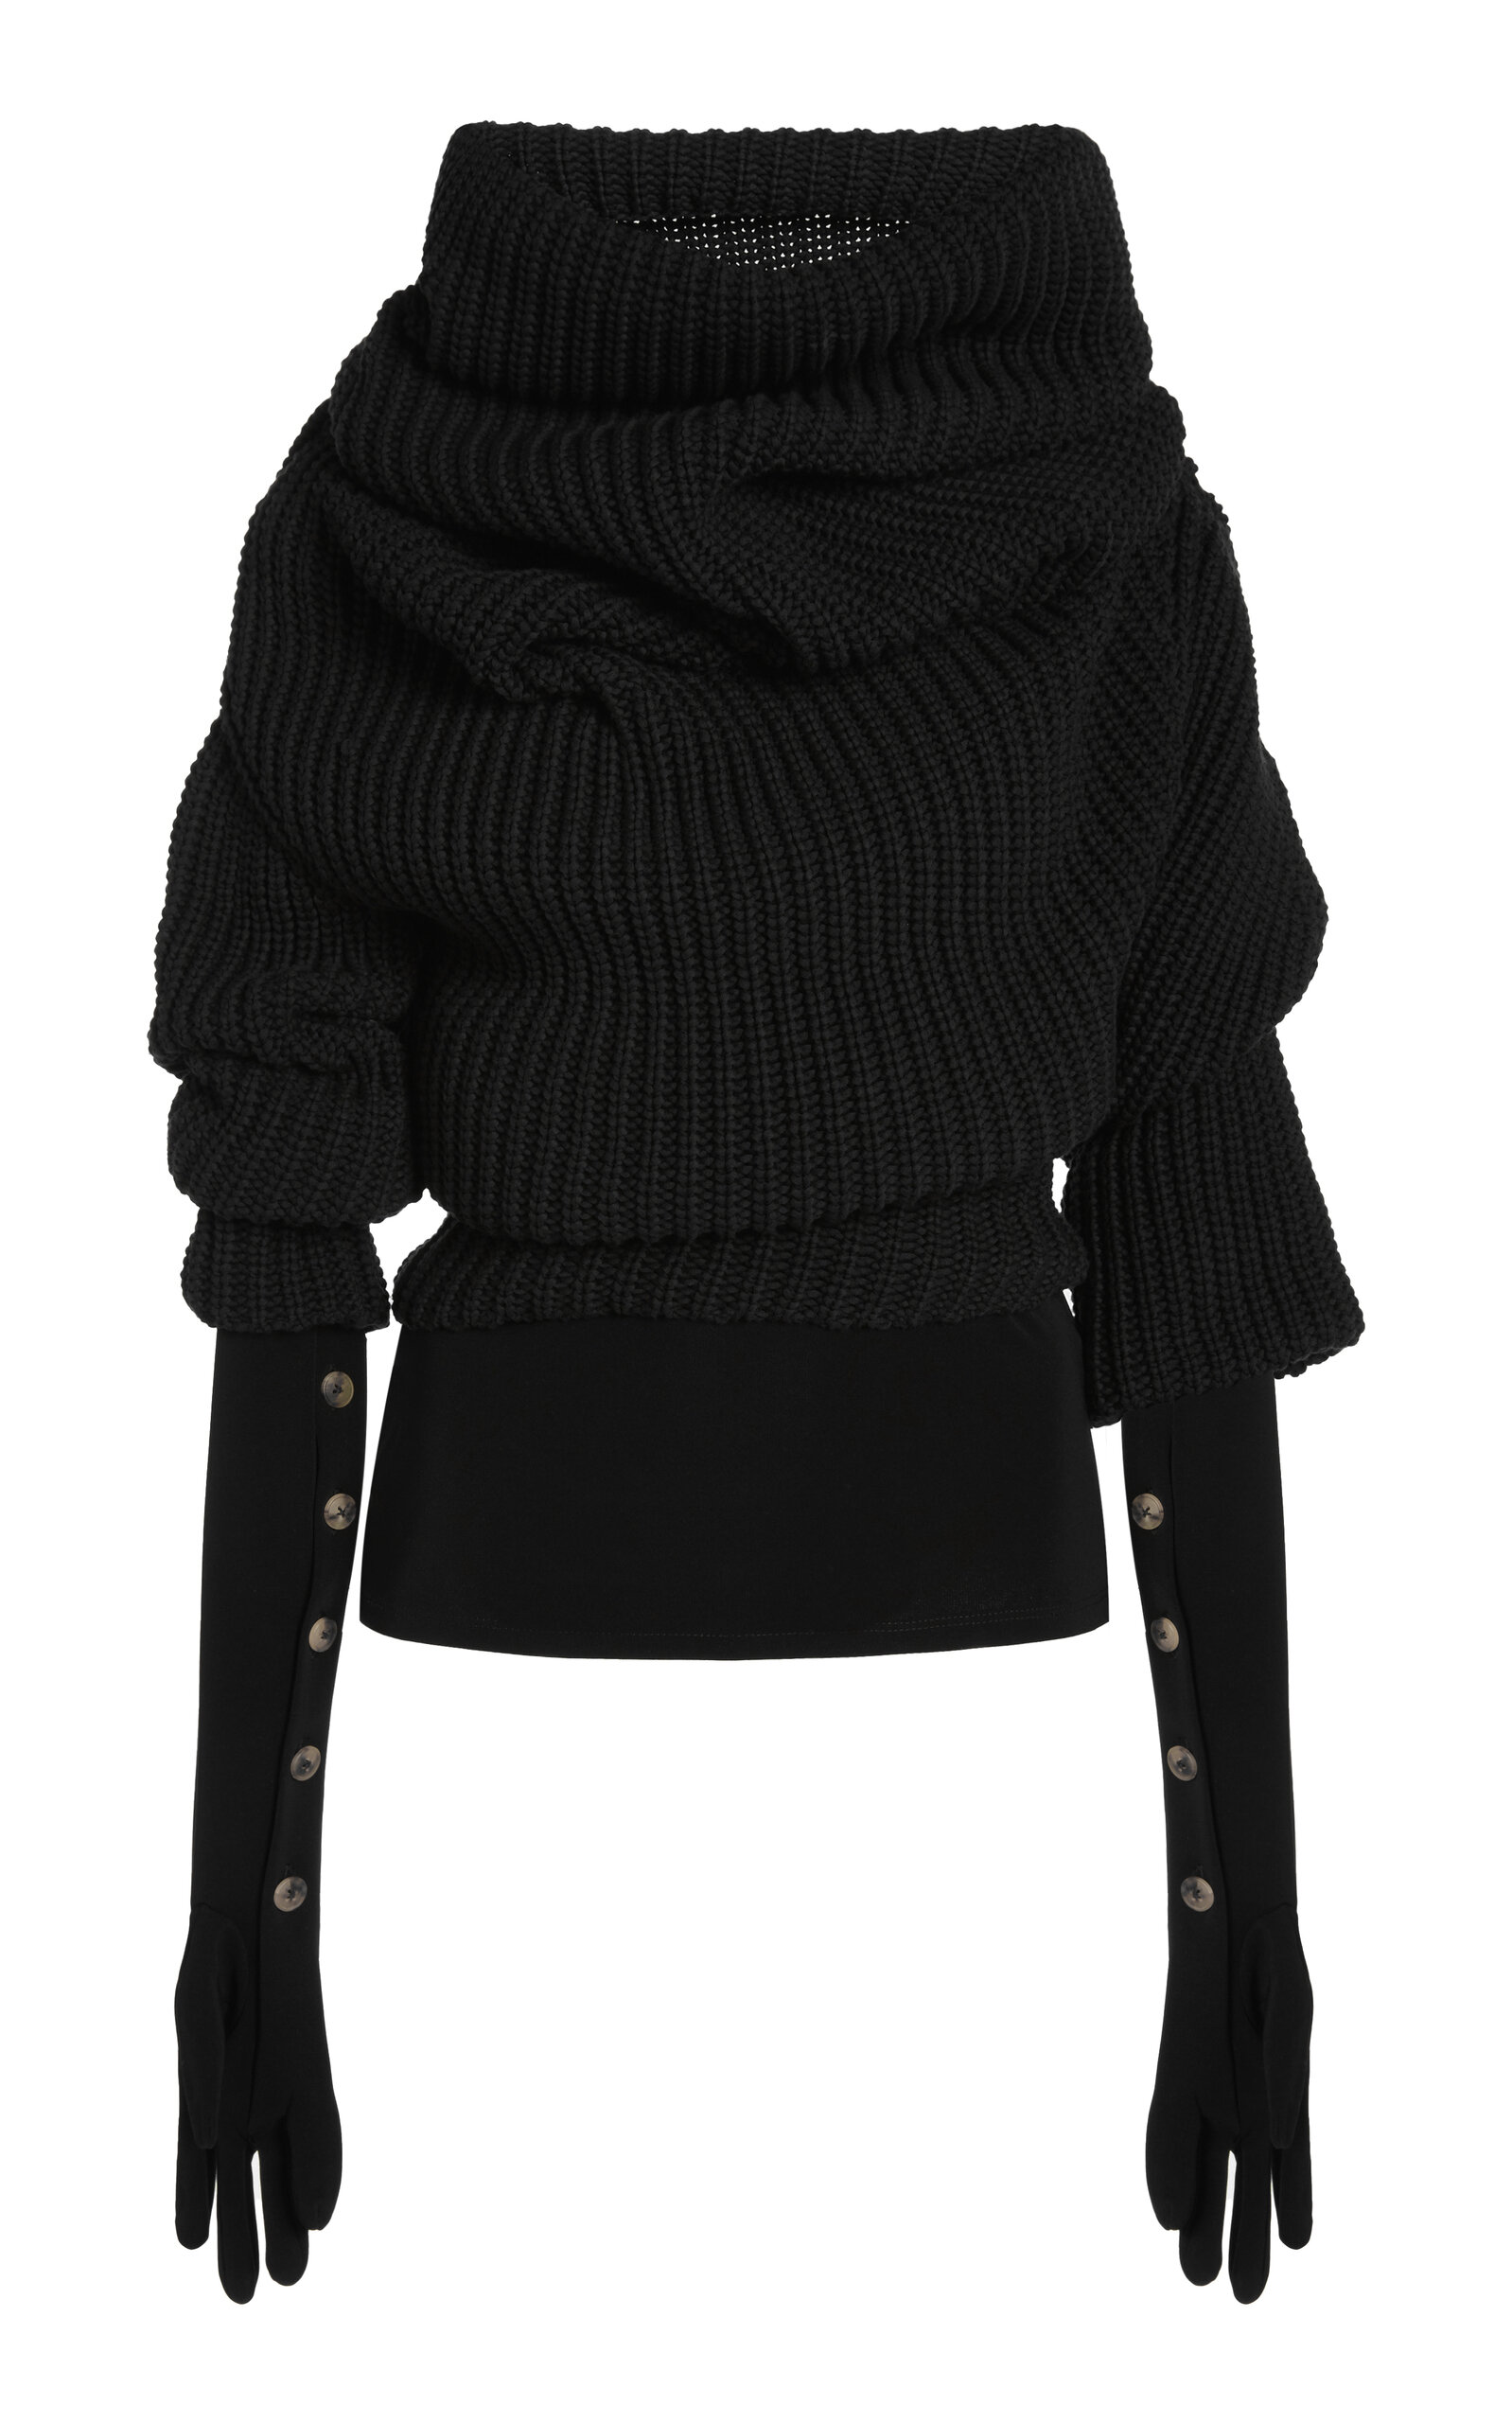 Knit Snood Glove-Detailed Top